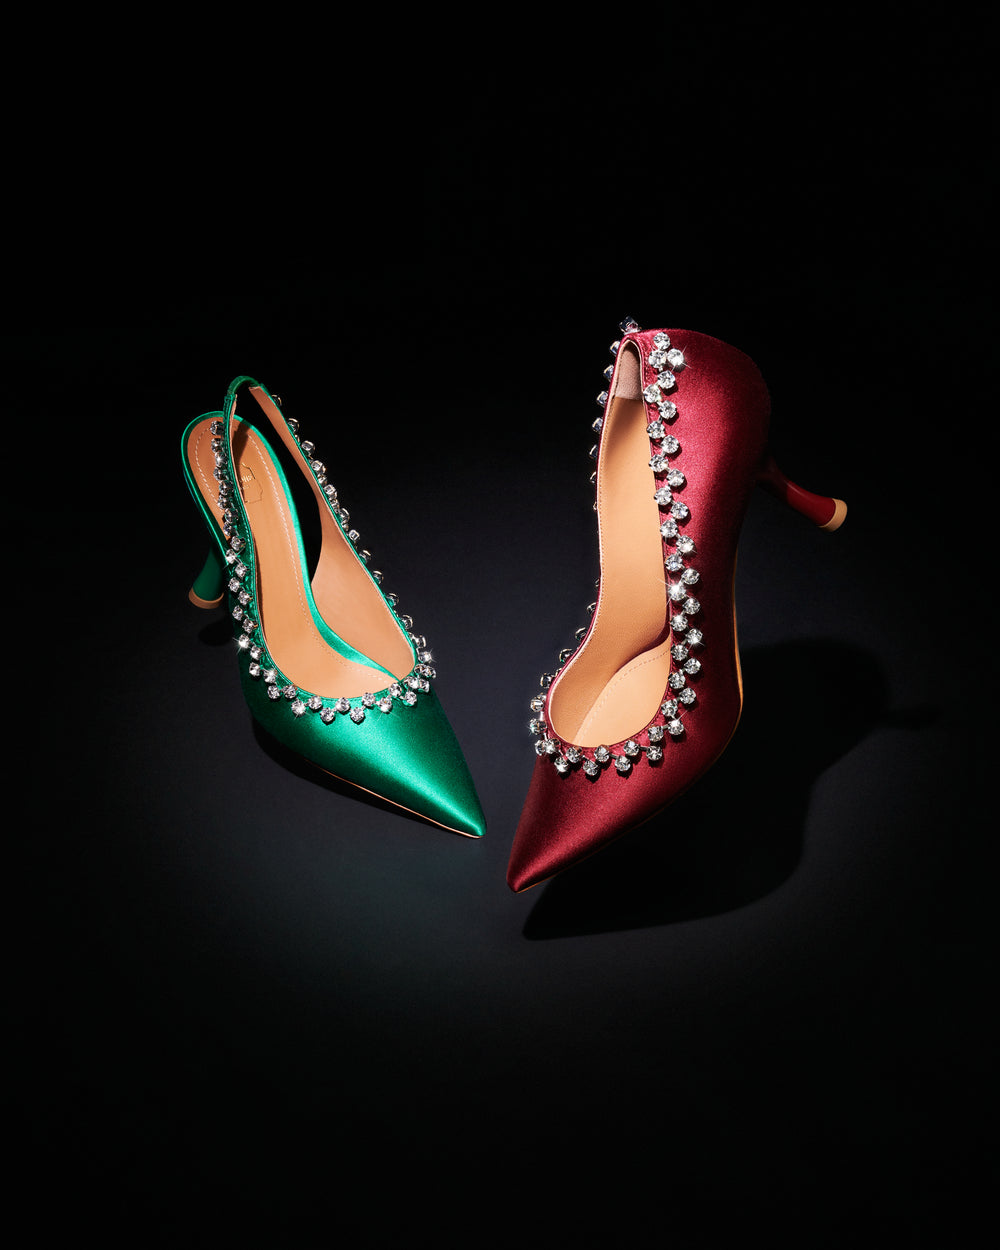 Women's Green Satin Heeled Slingbacks with Red Satin Heeled Pumps Malone Souliers